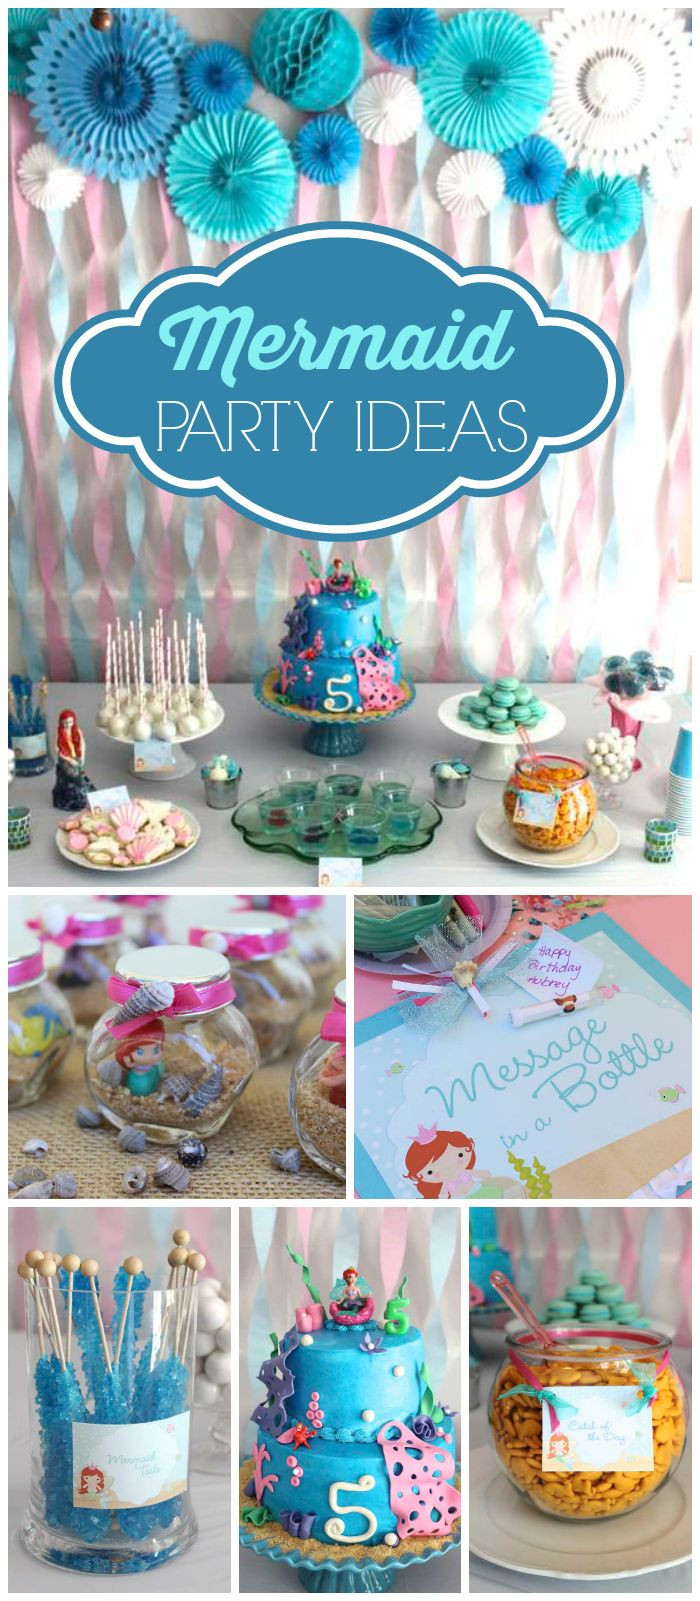 Mermaid Birthday Party Game Ideas
 25 best ideas about Mermaid party games on Pinterest